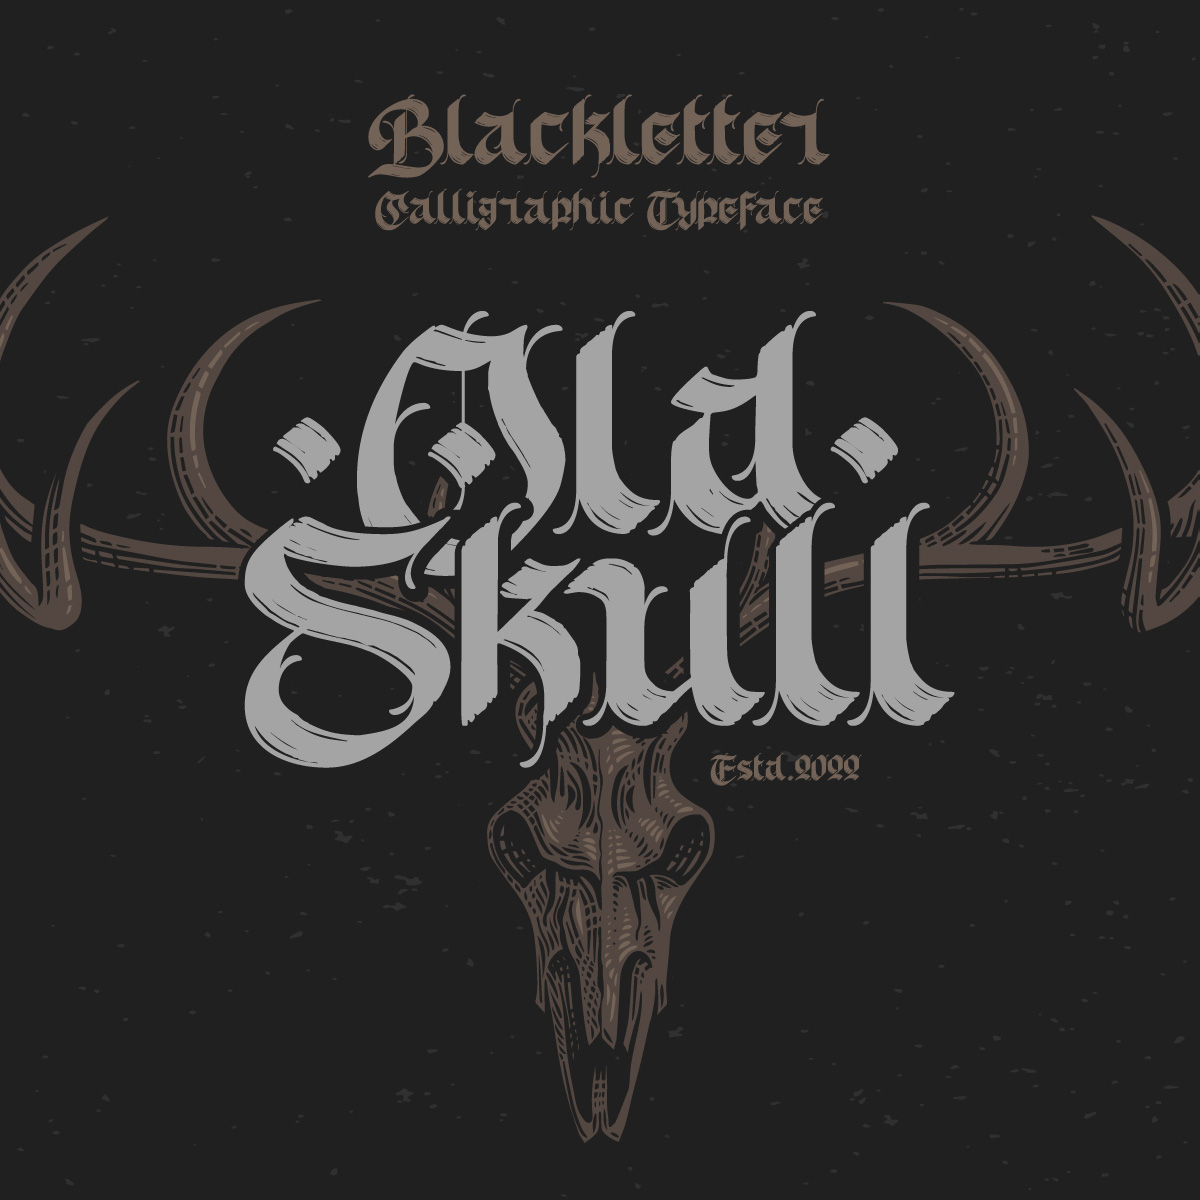 Old Skull Calligraphic Font cover image.